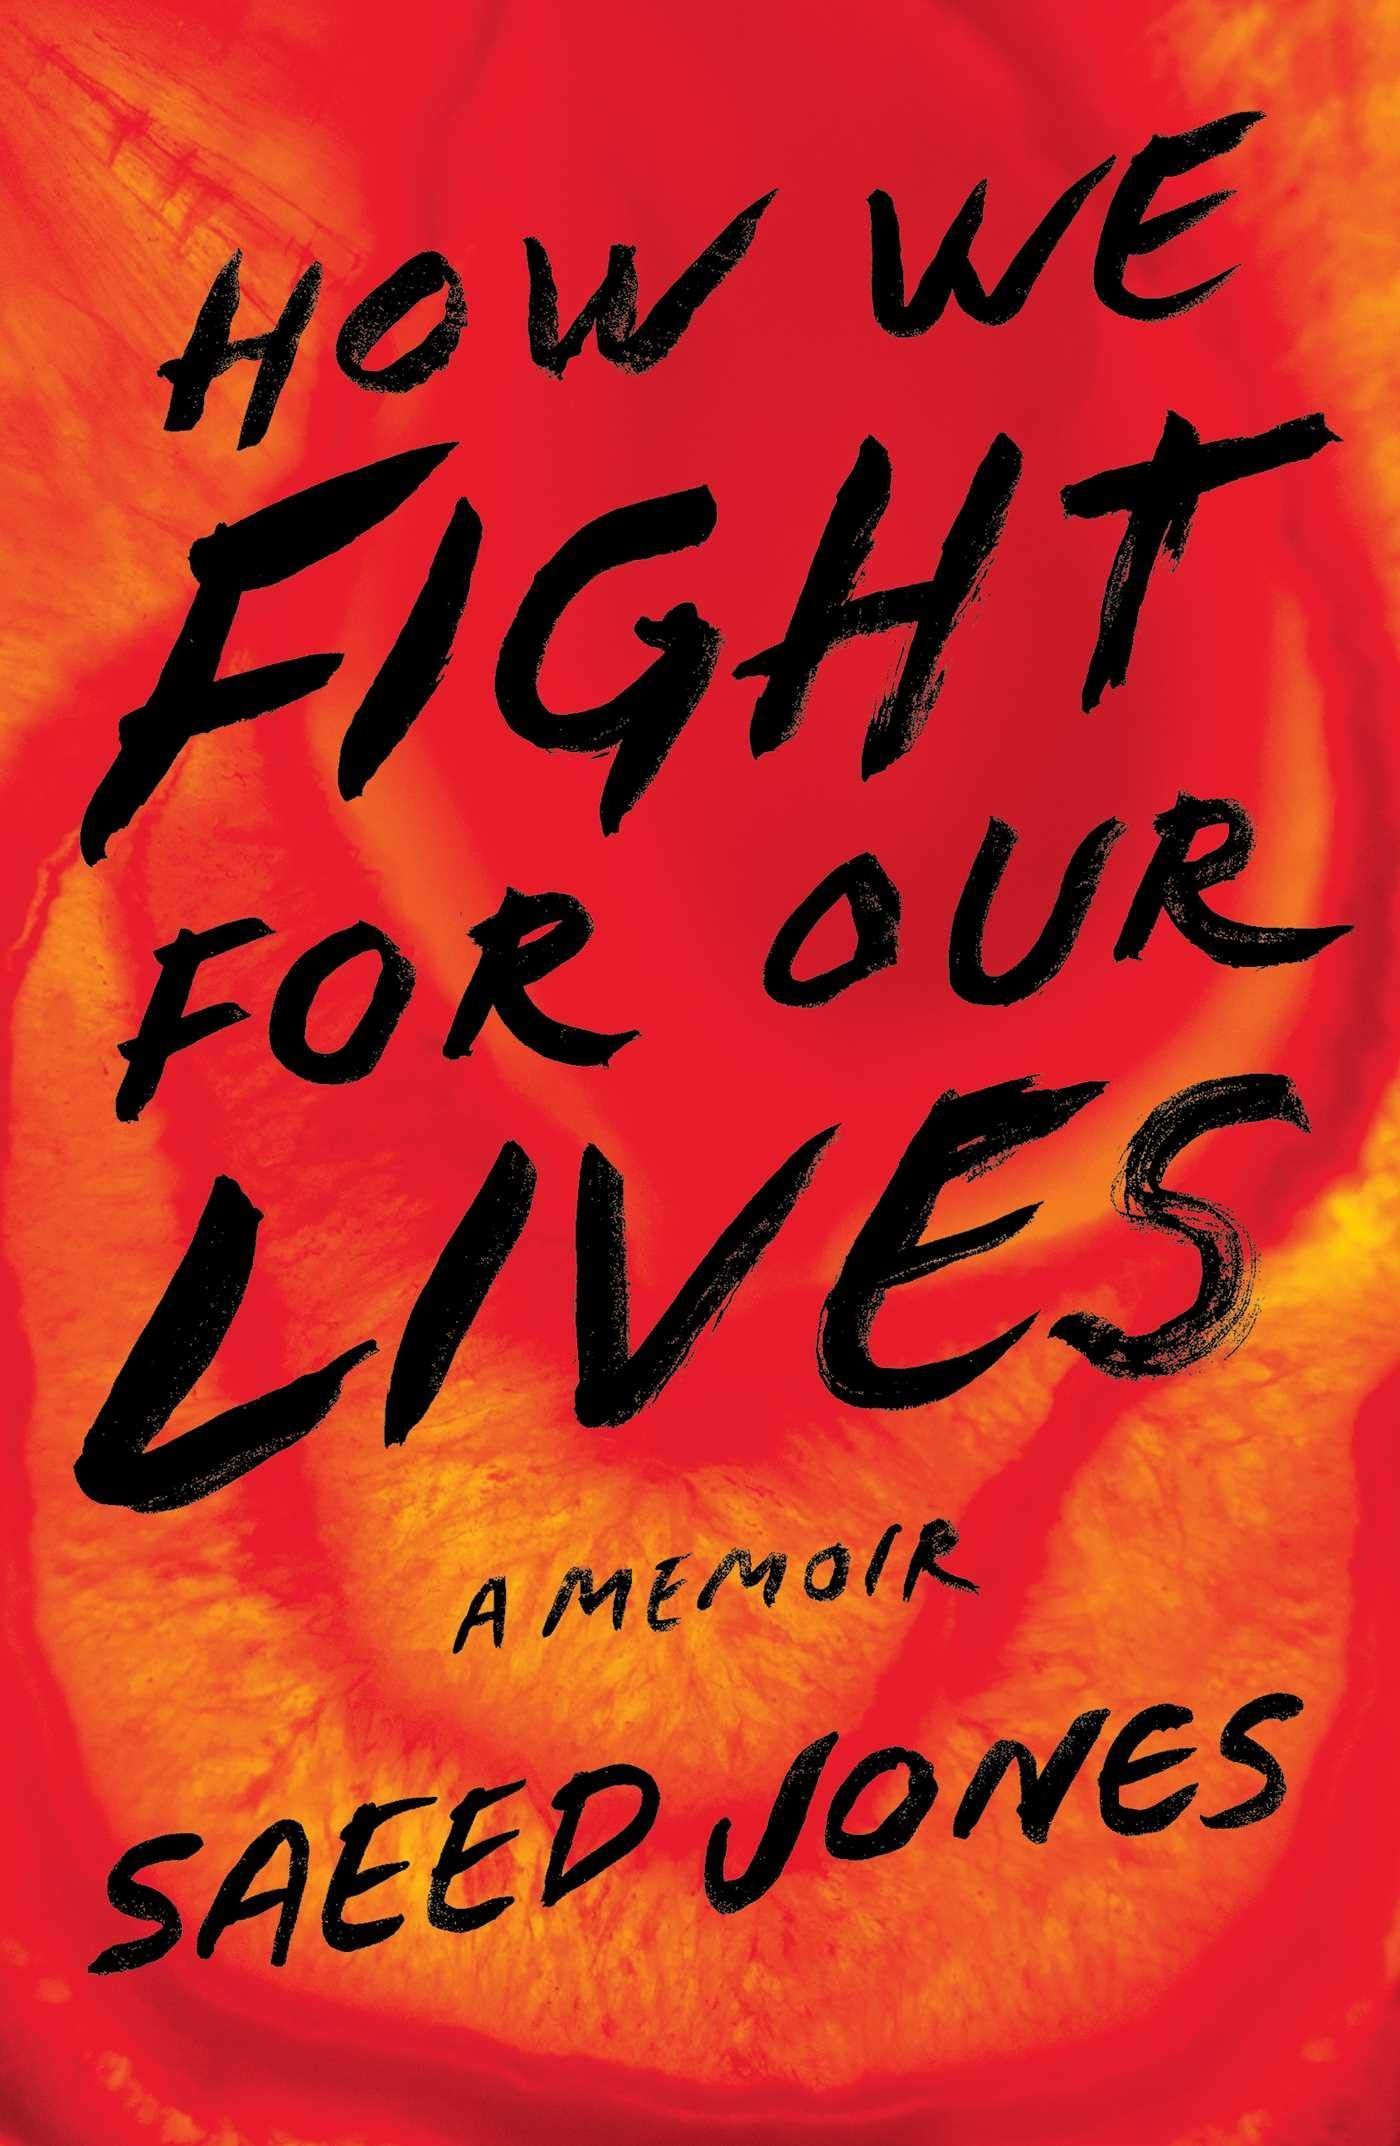 Our Bodies, Ourselves: On Saeed Jones’s “How We Fight for Our Lives”